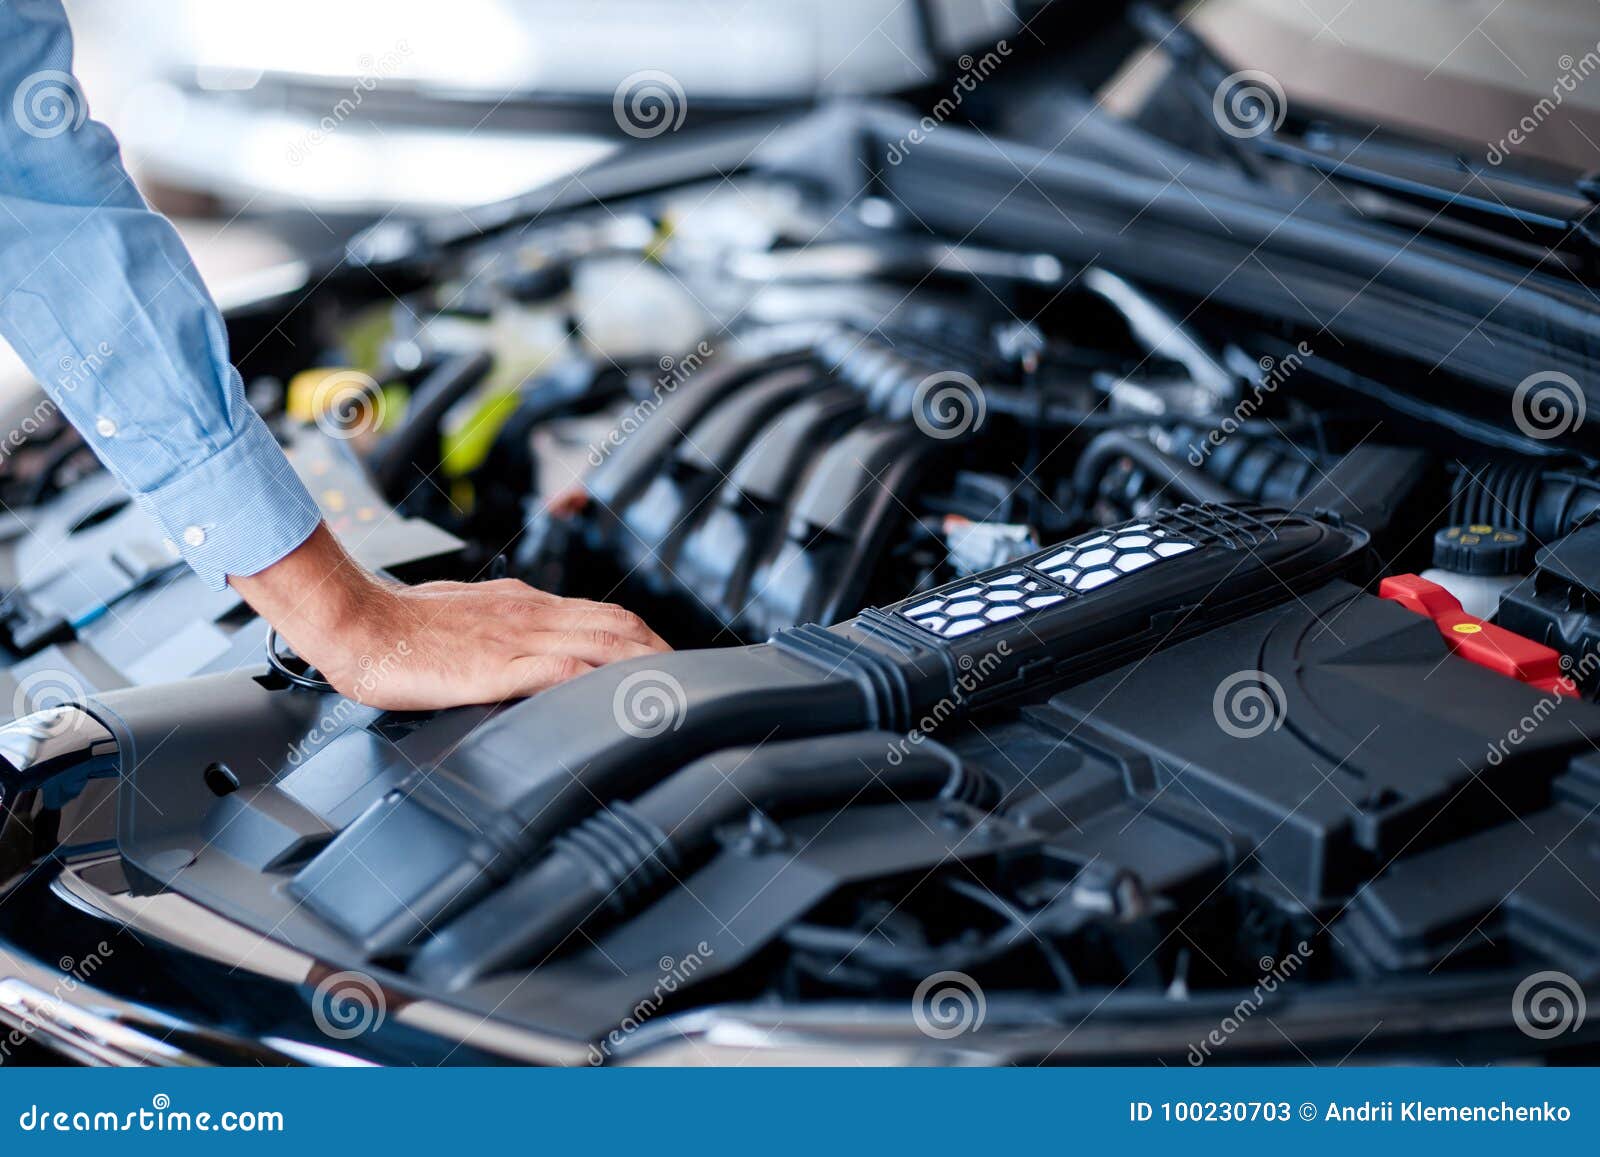 Car Detailing Series : Cleaning Car Engine. Close-up Engine Stock Image